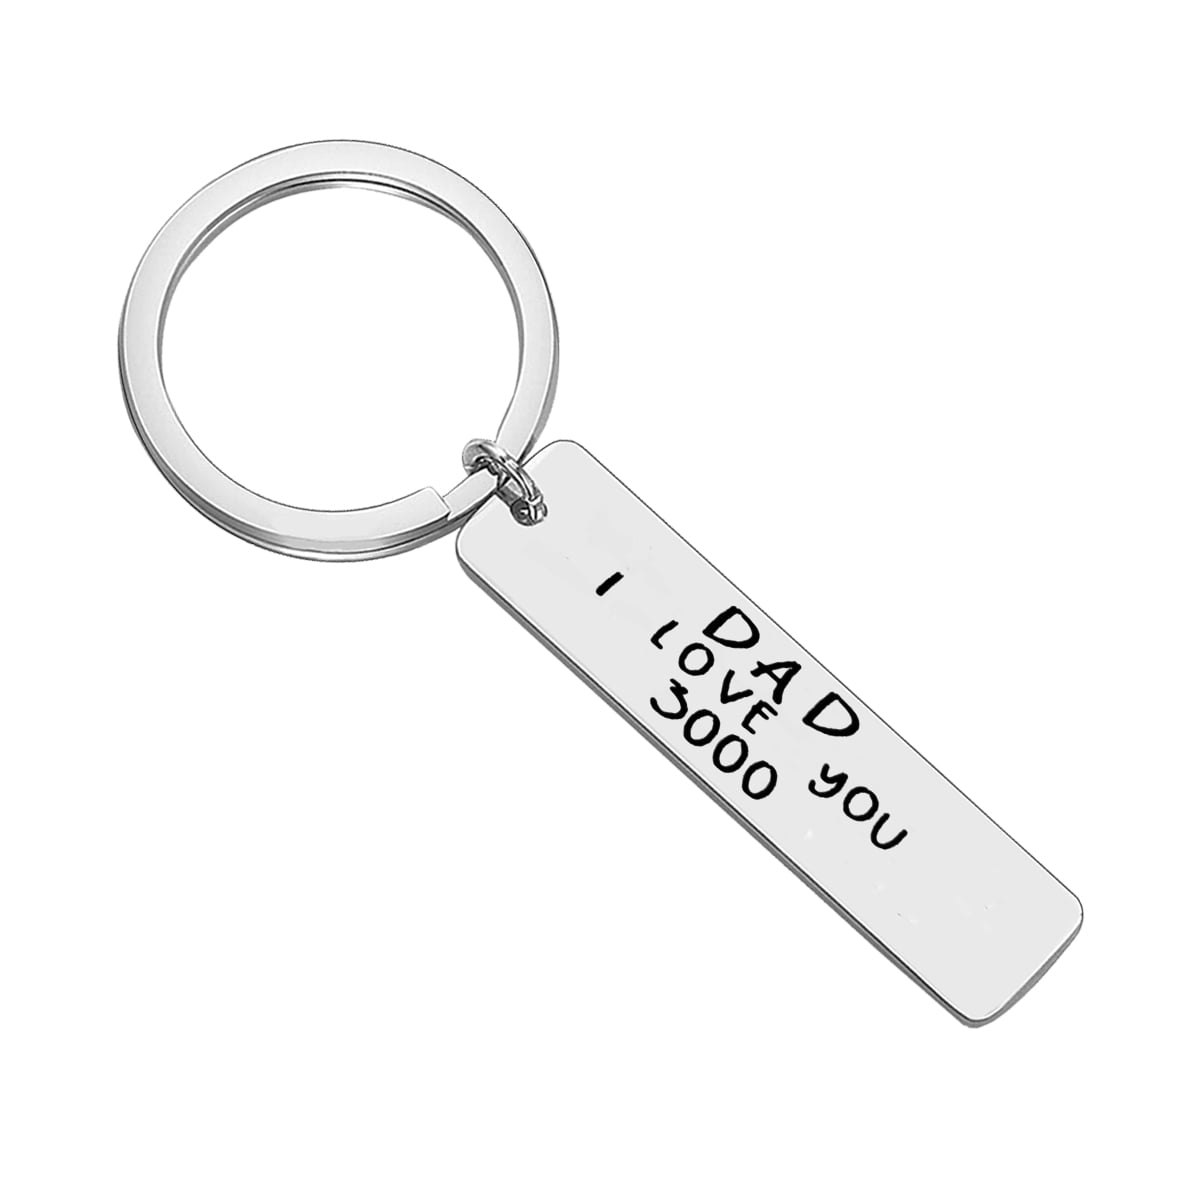 Thanksgiving Birthday Wedding Christmas Valentine's Day Presents Personalized Stainless Steel Key Ring Dog Tag for Men New Father in Law from Daughter Son Step Dad Father’s Day Gifts Keychain 